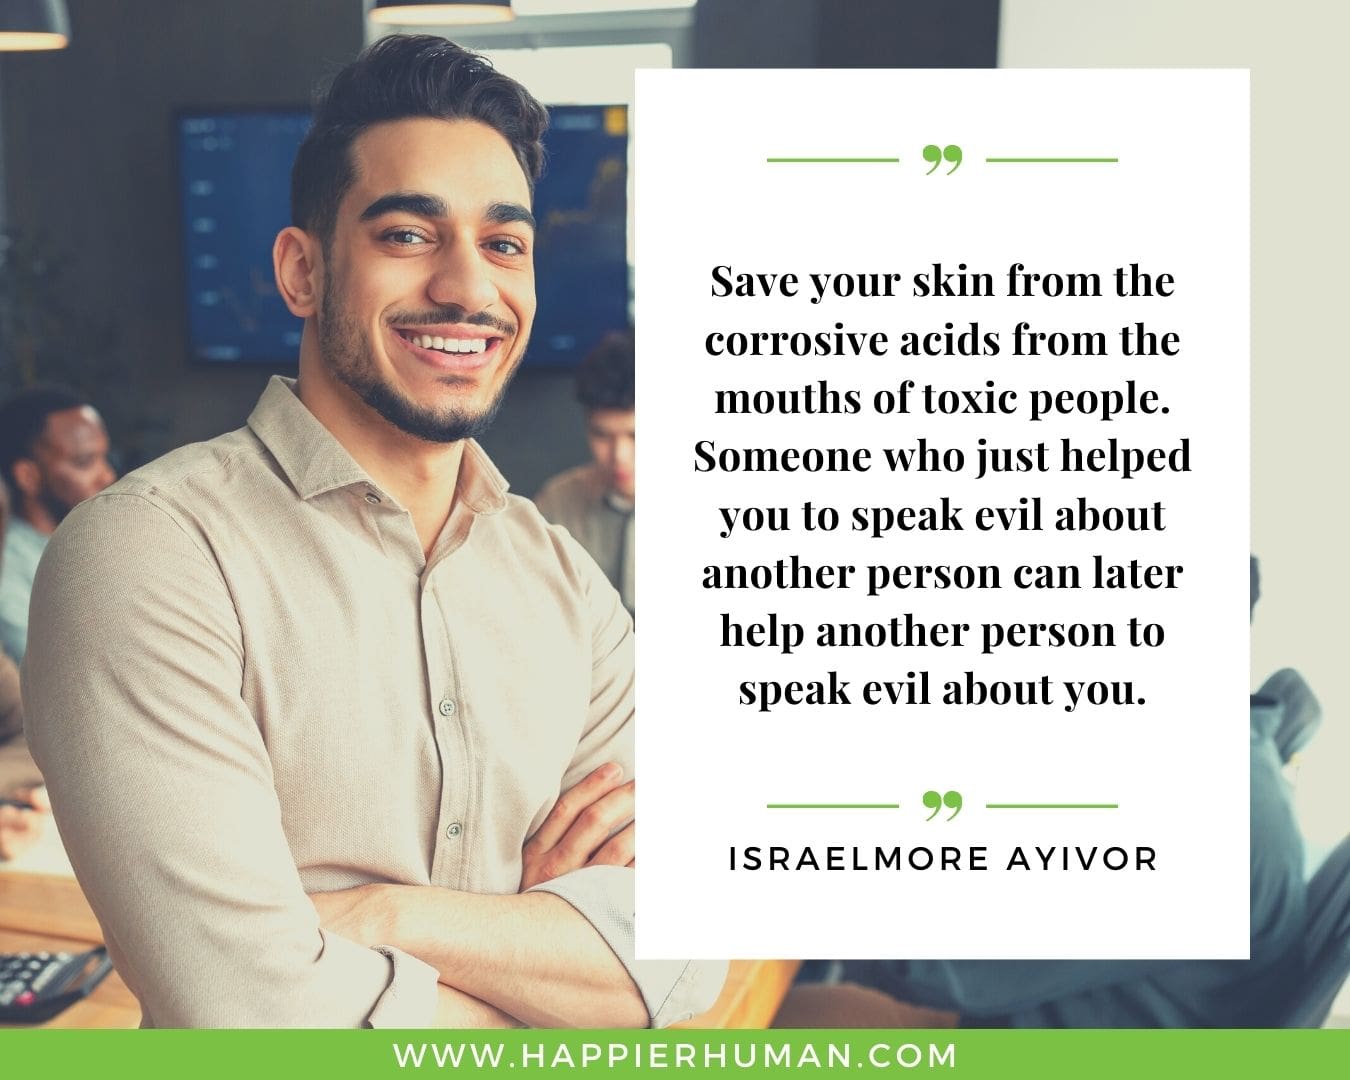 Toxic People Quotes - “Save your skin from the corrosive acids from the mouths of toxic people. Someone who just helped you to speak evil about another person can later help another person to speak evil about you.” – Israelmore Ayivor